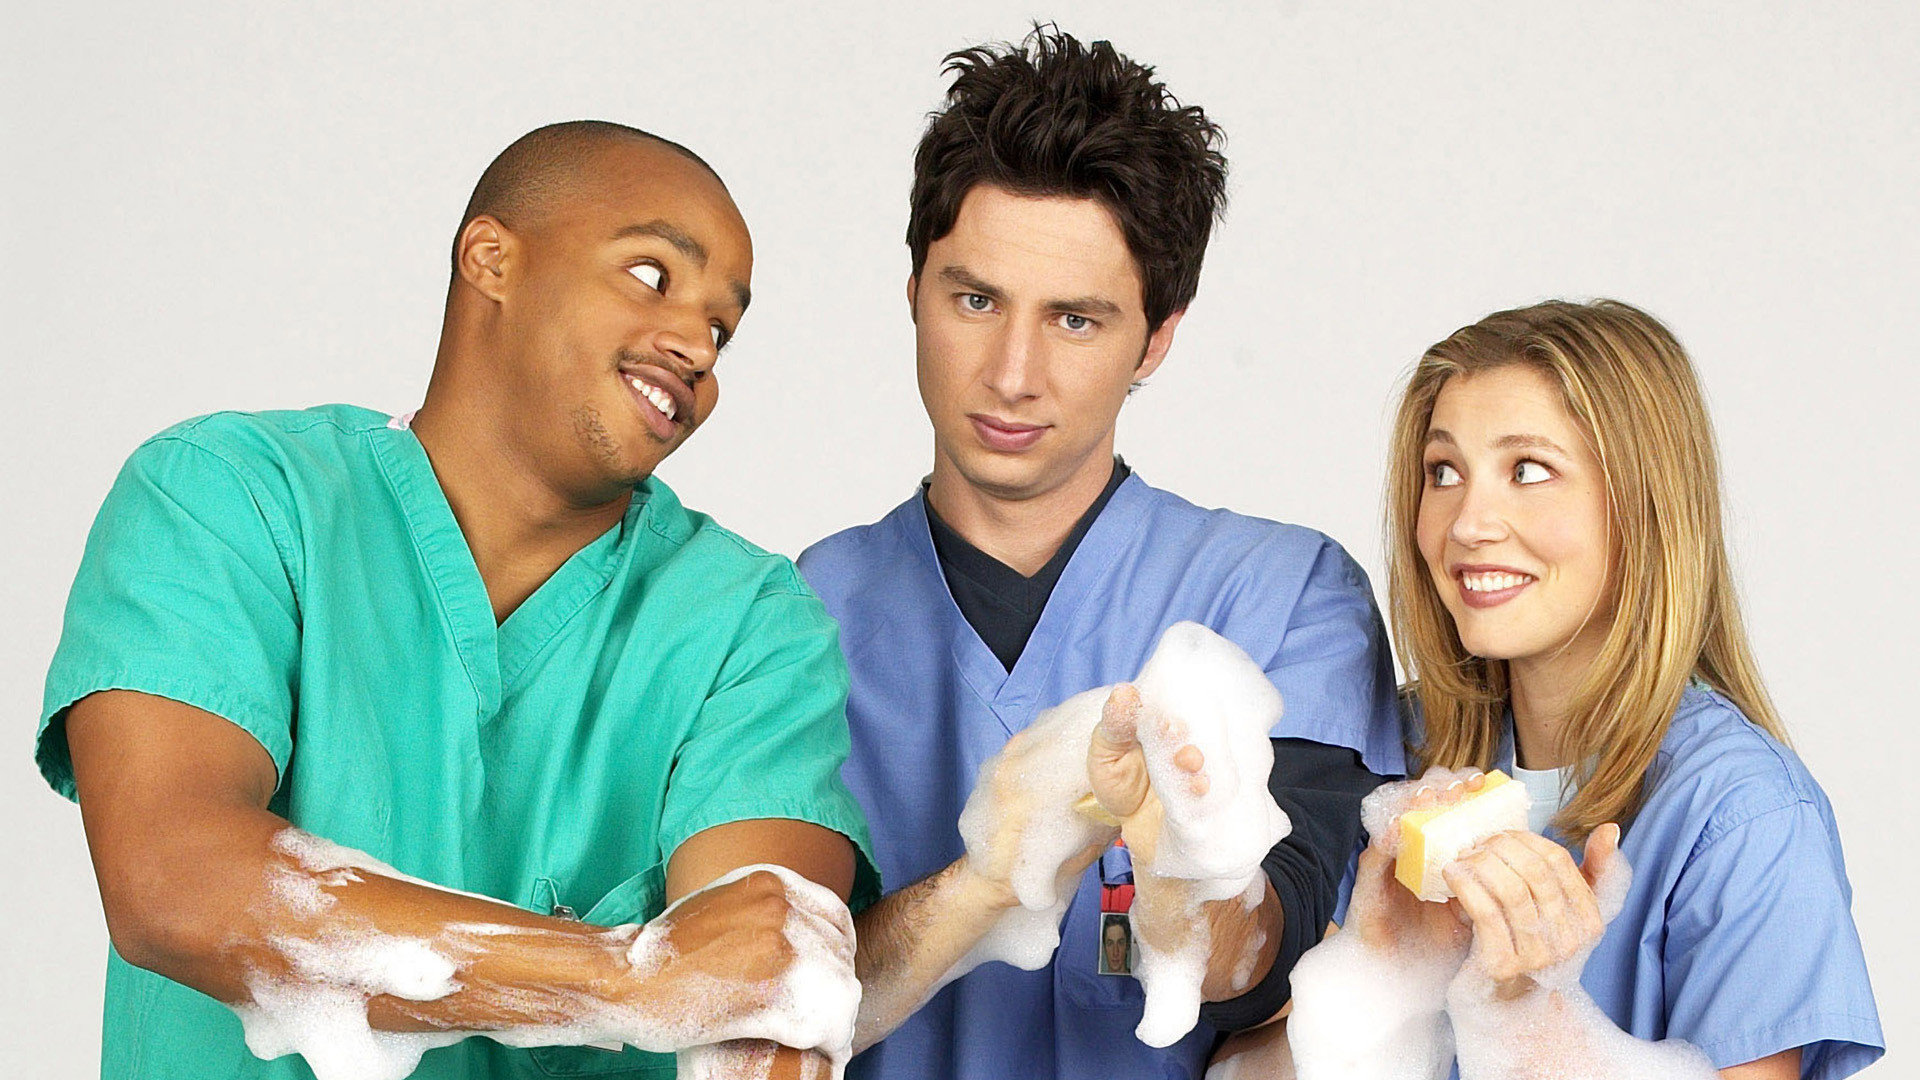 Download full hd 1920x1080 Scrubs PC background ID:84061 for free